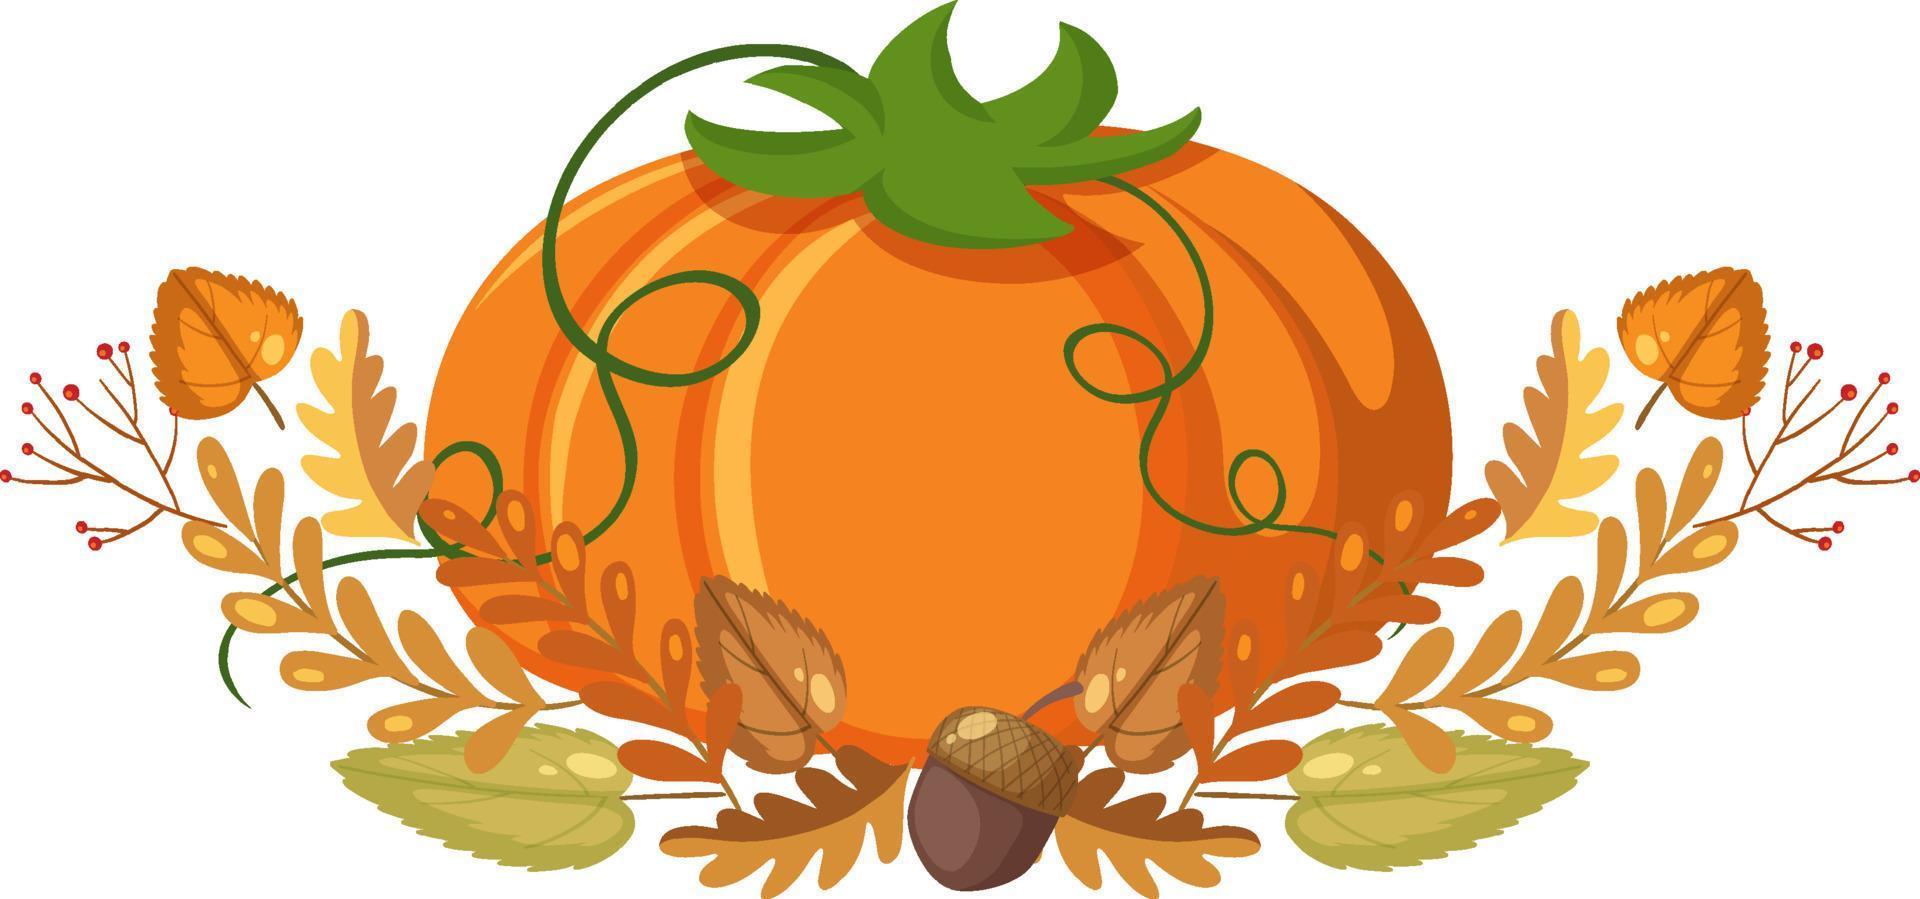 Pumpkin with leaf ornaments on white background vector